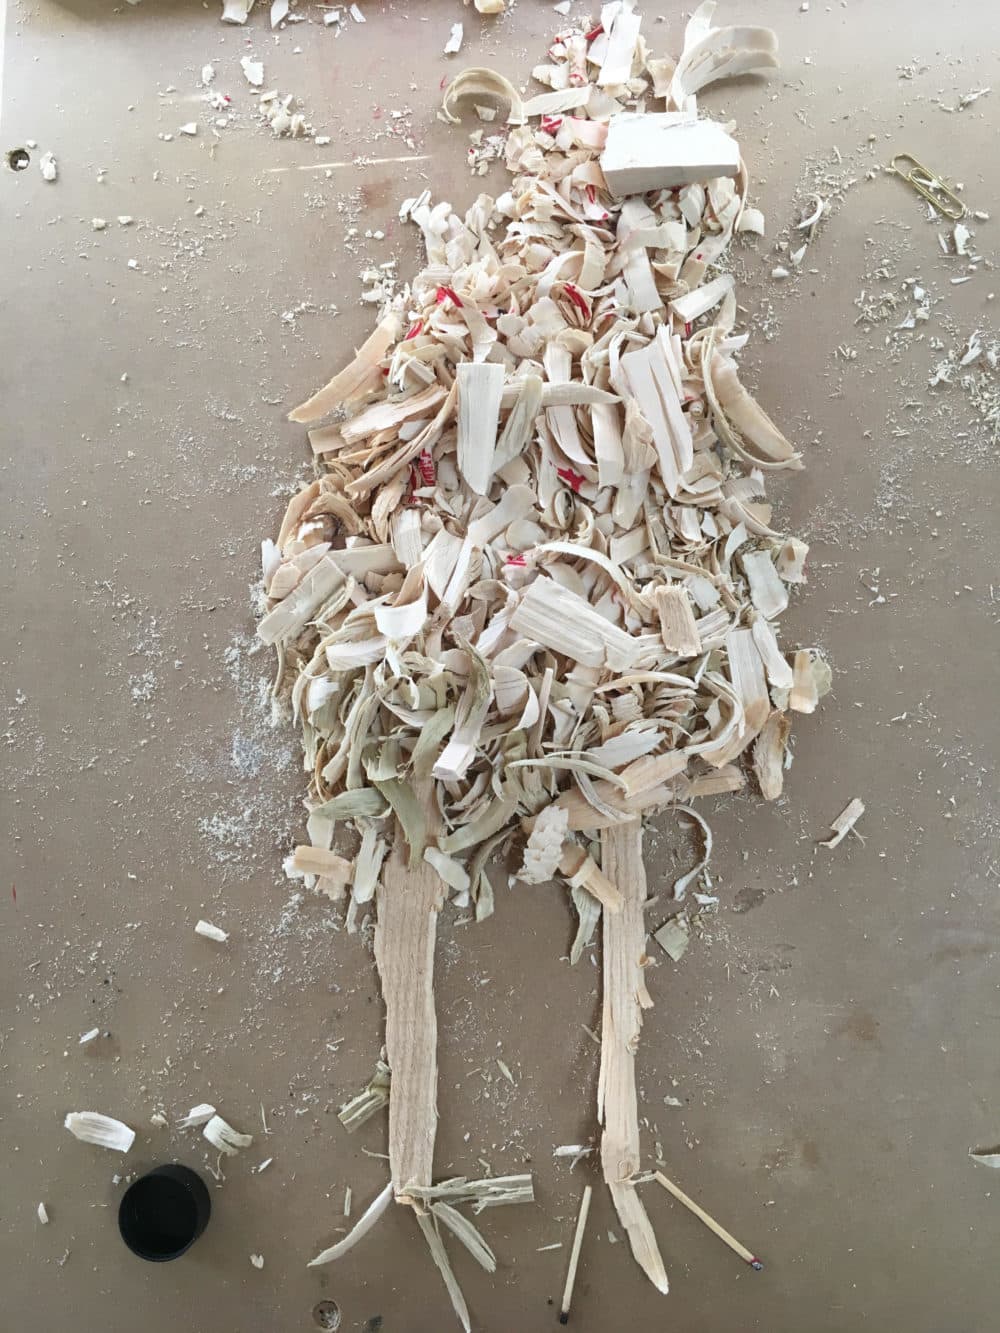 A chicken made of wood shavings and matches by Sophia DiLibero. (Courtesy Chuck Stigliano)